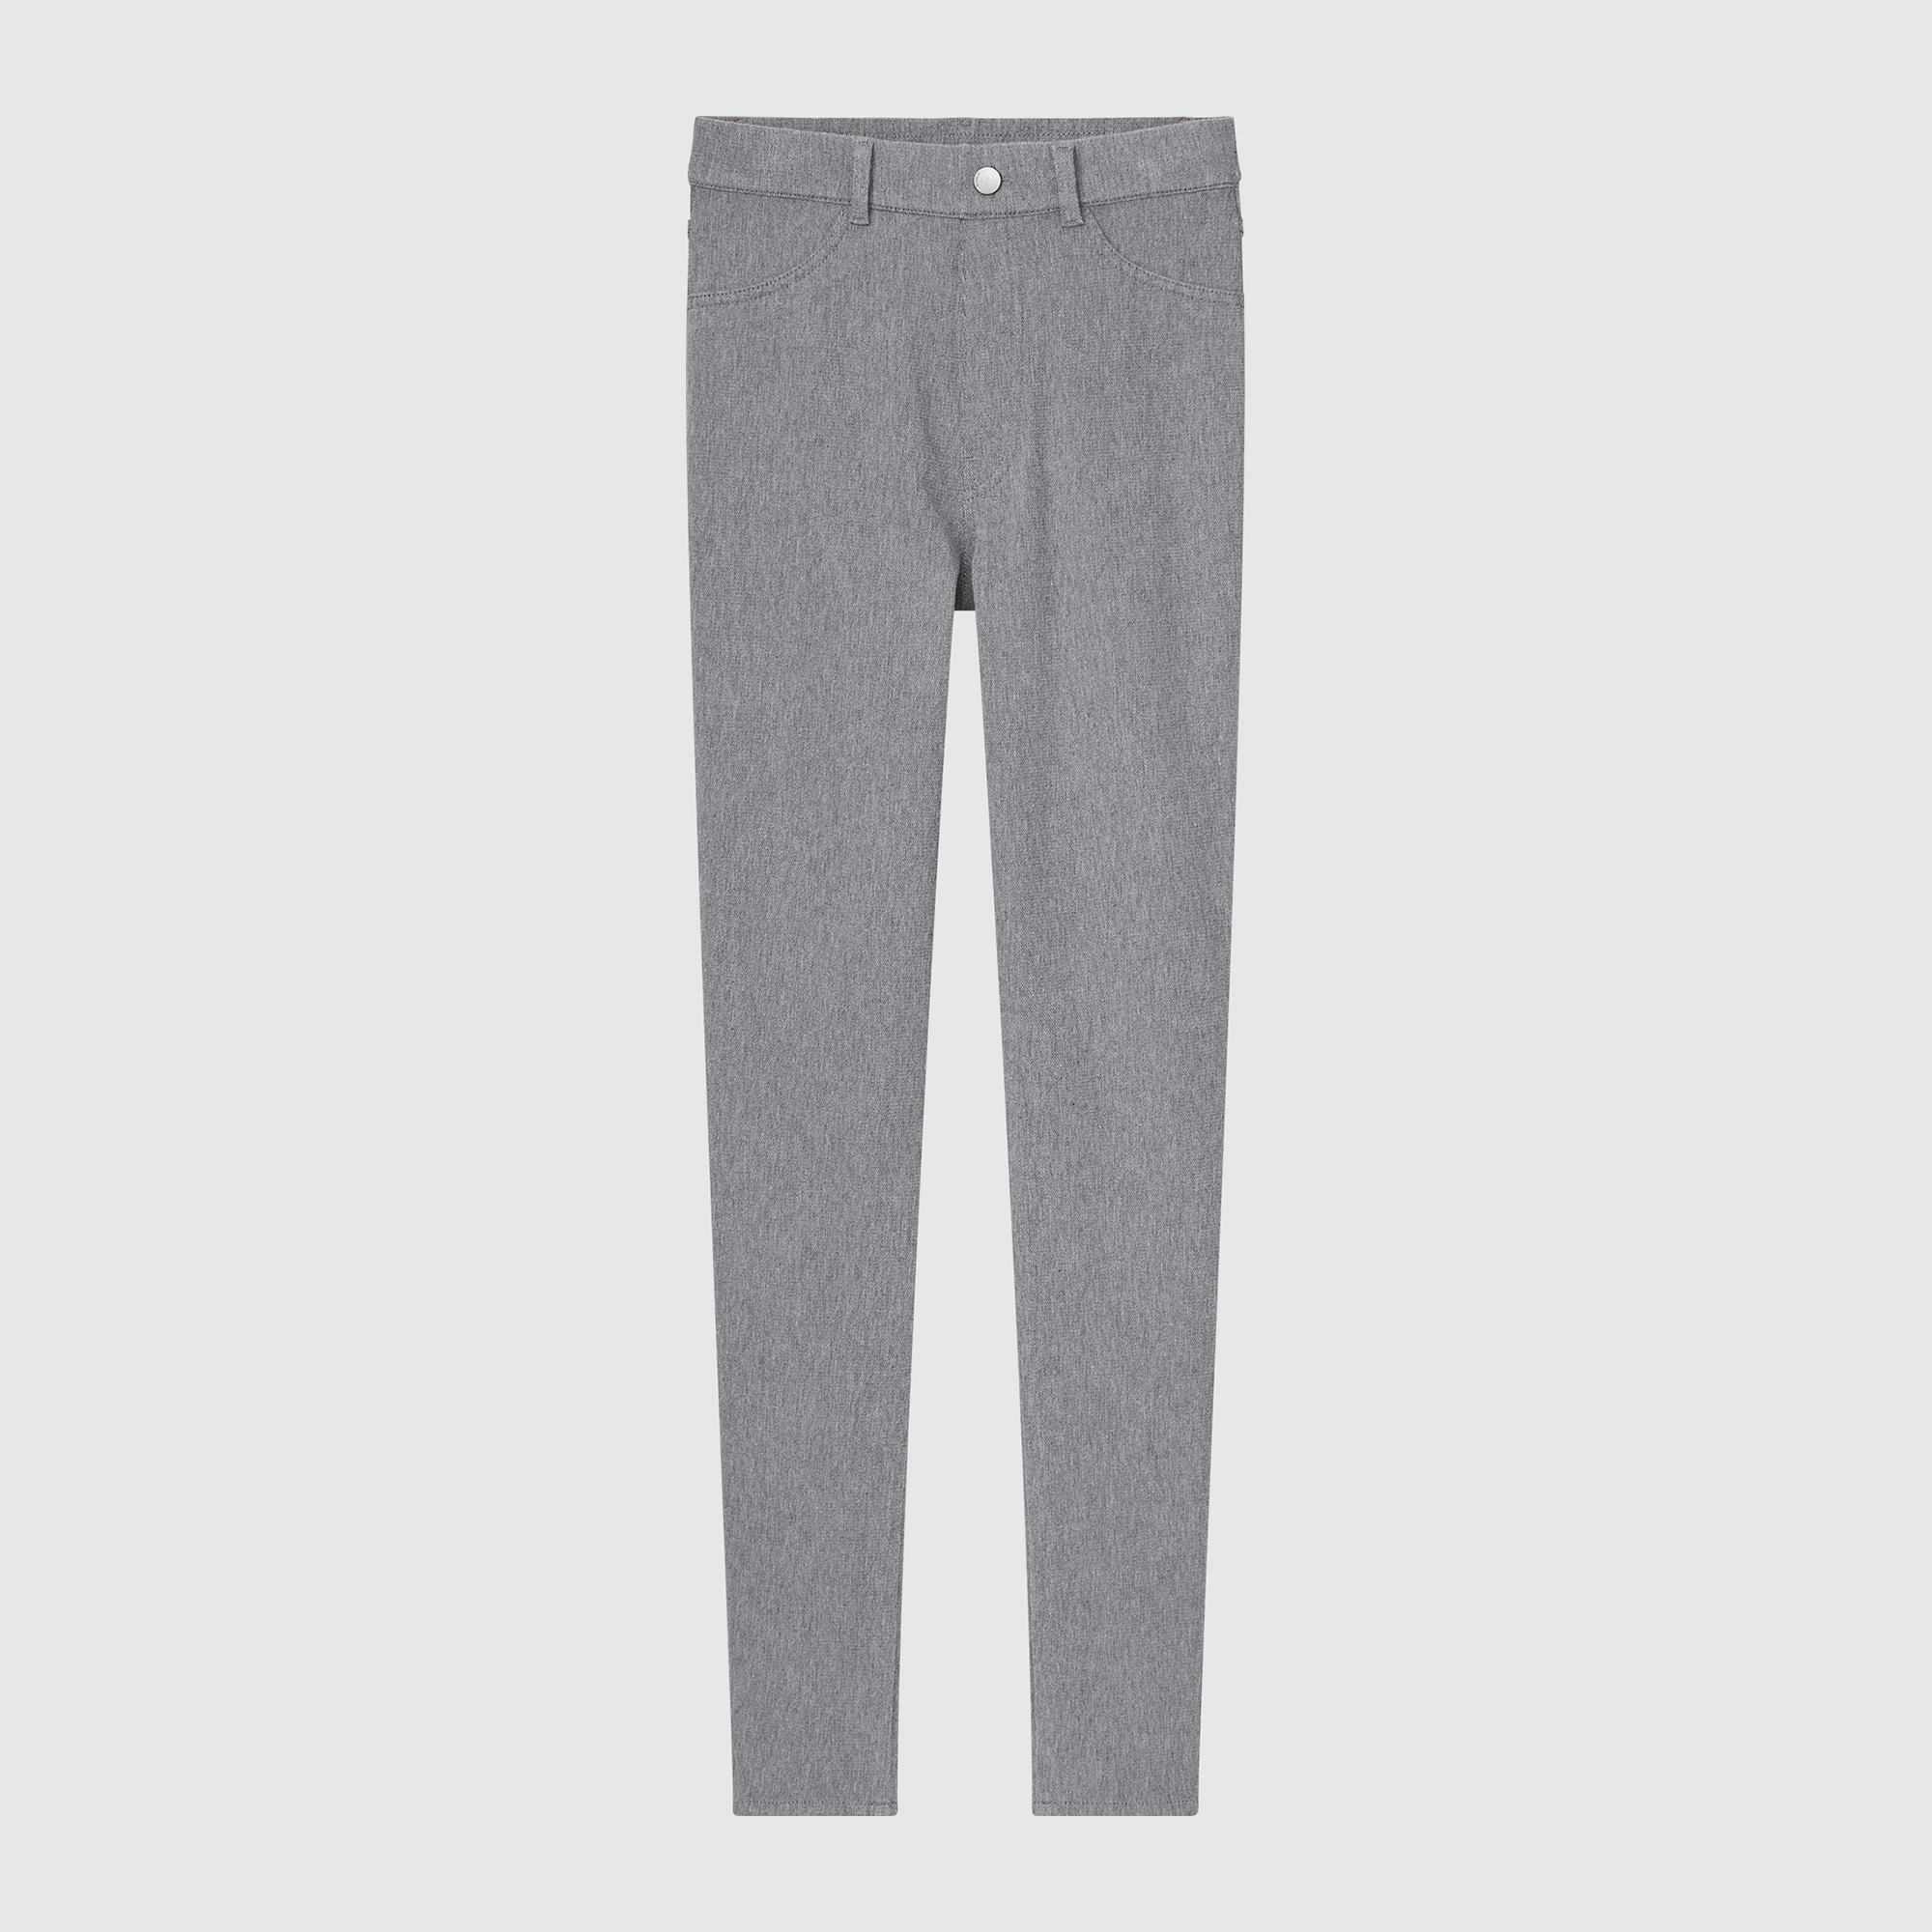 WOMEN'S ULTRA STRETCH HIGH RISE CROPPED LEGGINGS PANTS | UNIQLO TH